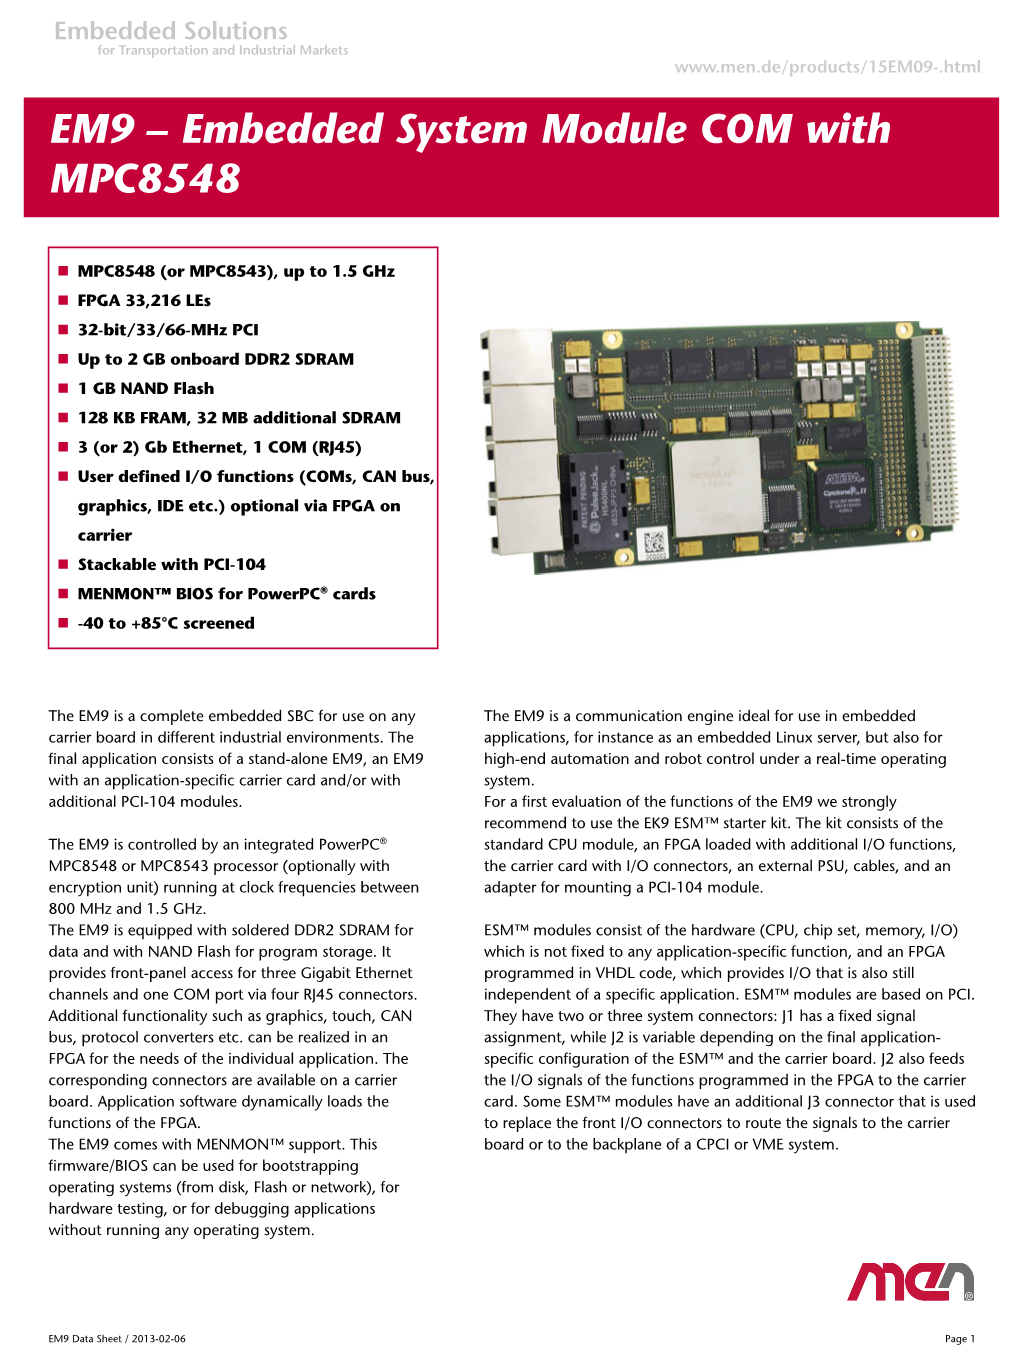 EM9 – Embedded System Module COM with MPC8548